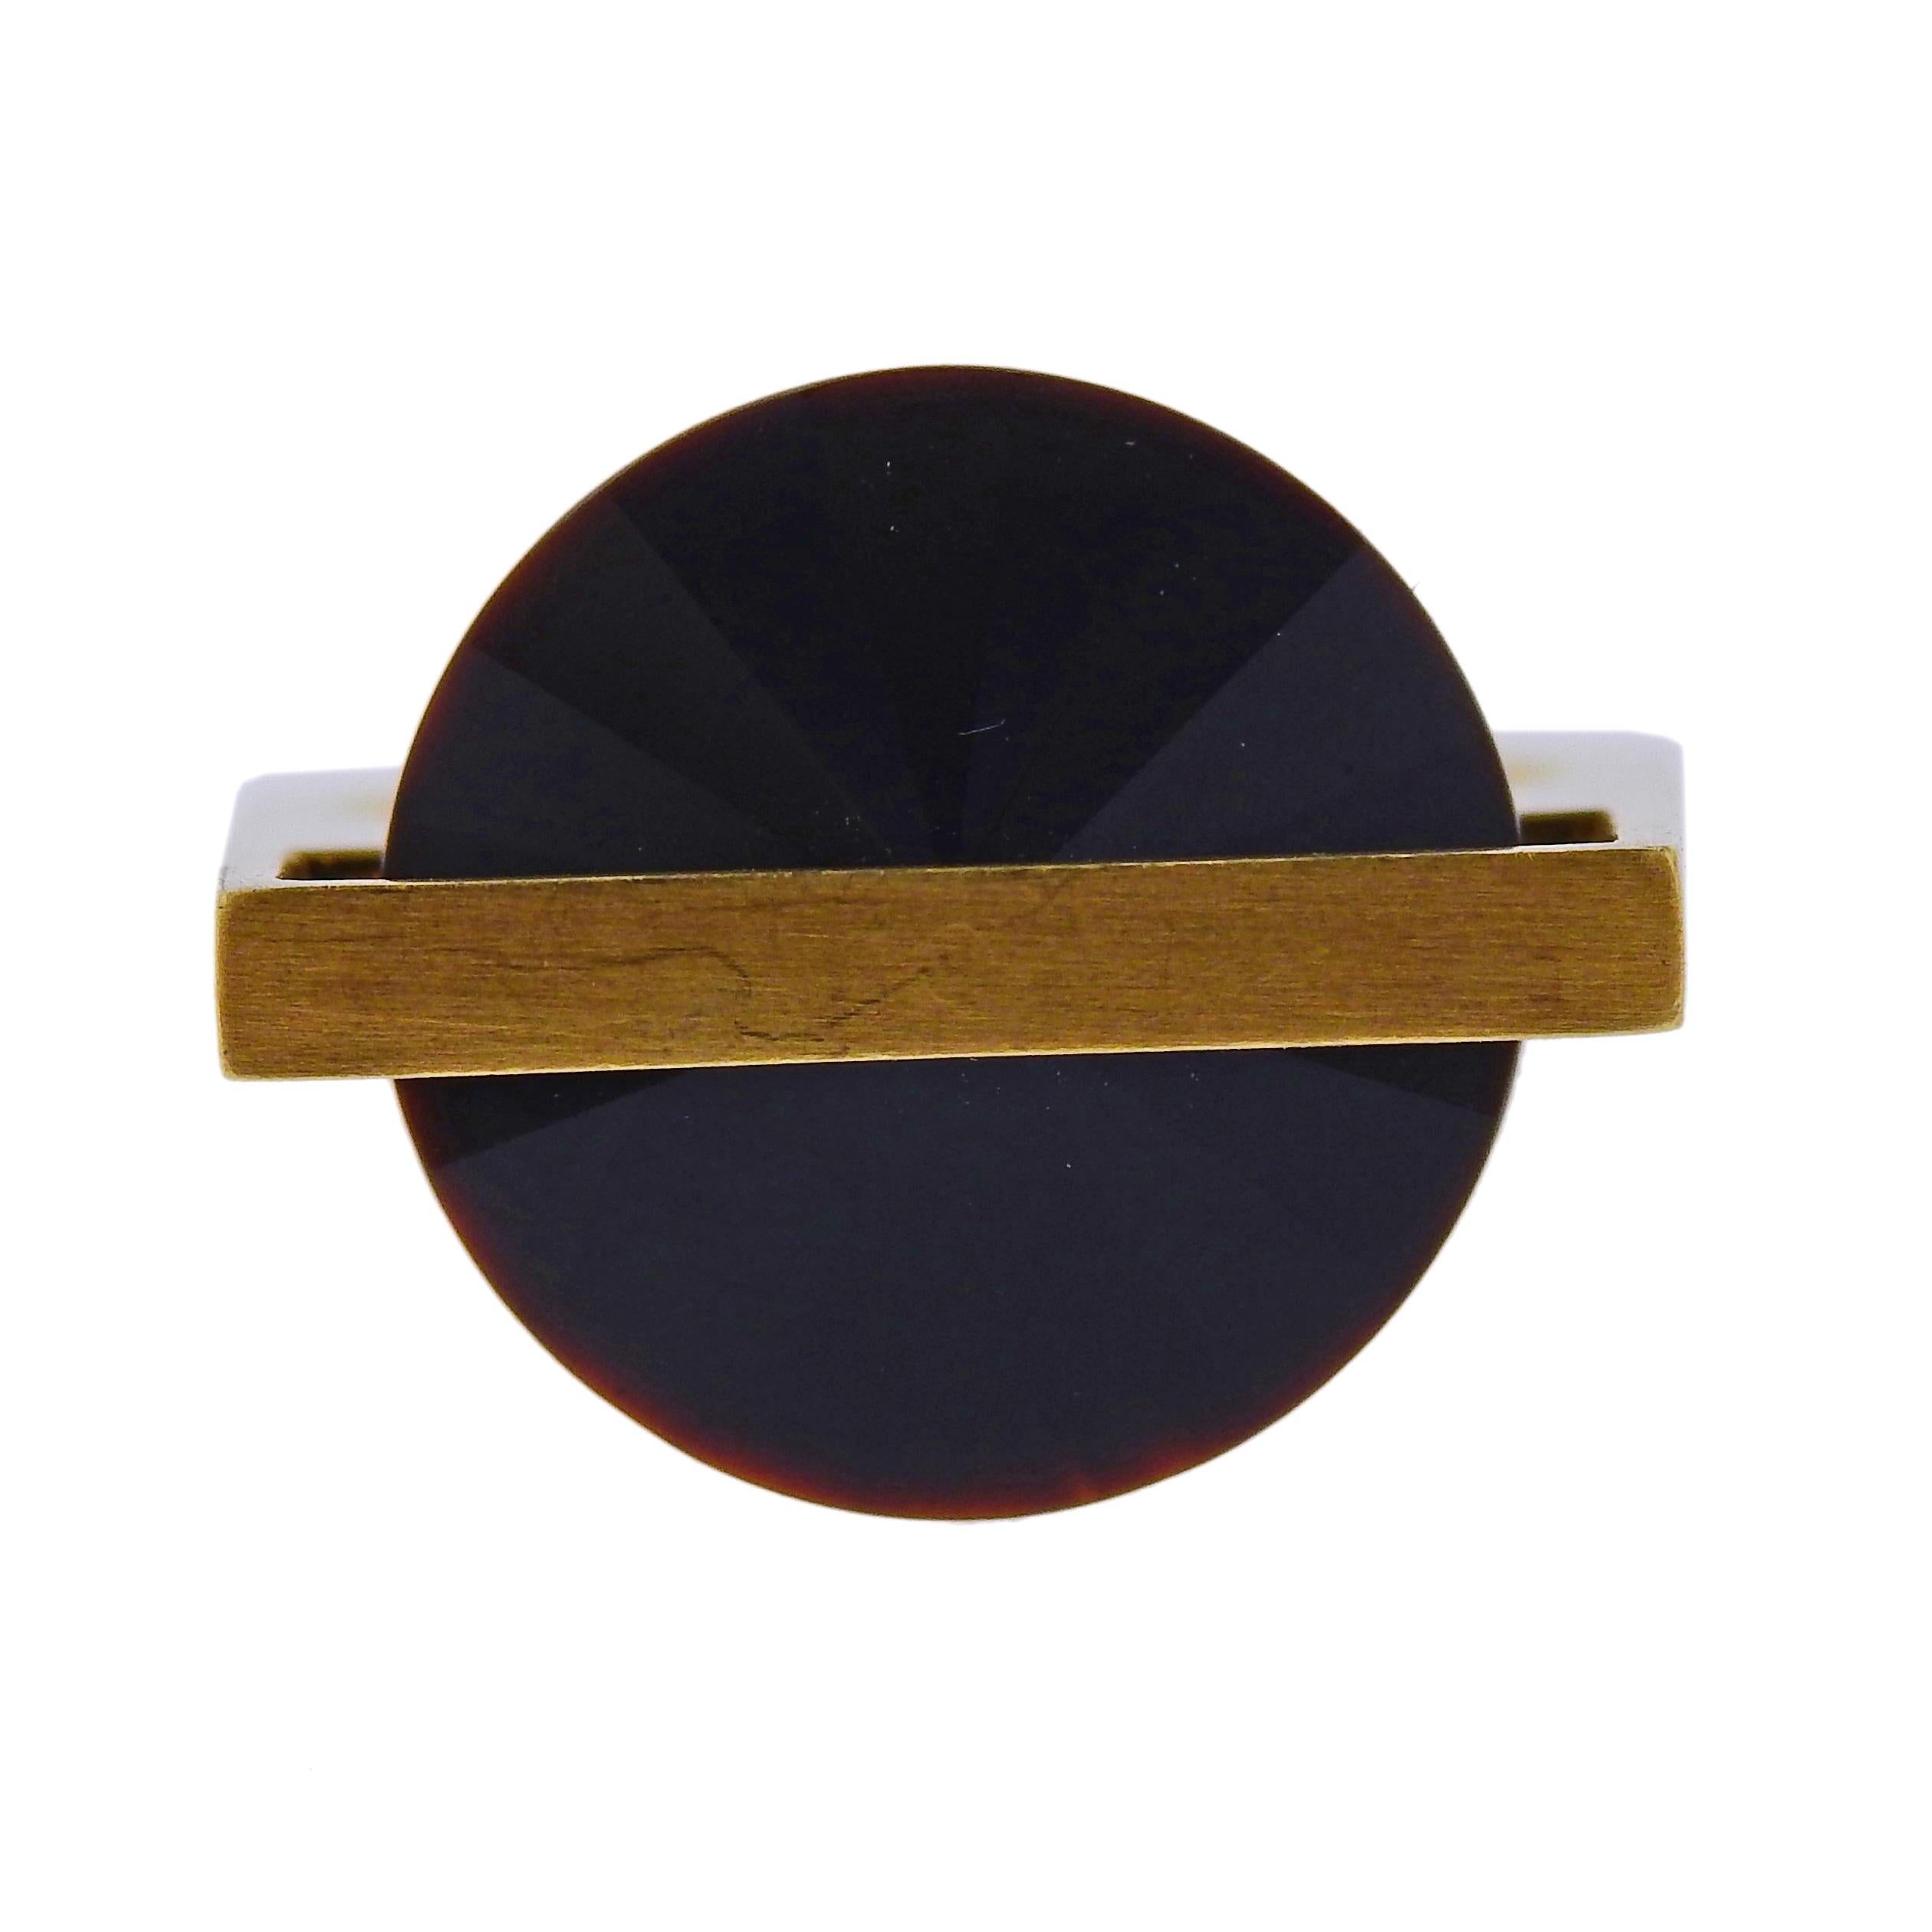 18k yellow gold geometric ring, crafted by Antonio Bernardo, featuring 15mm black gemstone. Ring size - 6.75 and weighs 7.8 grams. Marked Maker's symbol mark, 750.